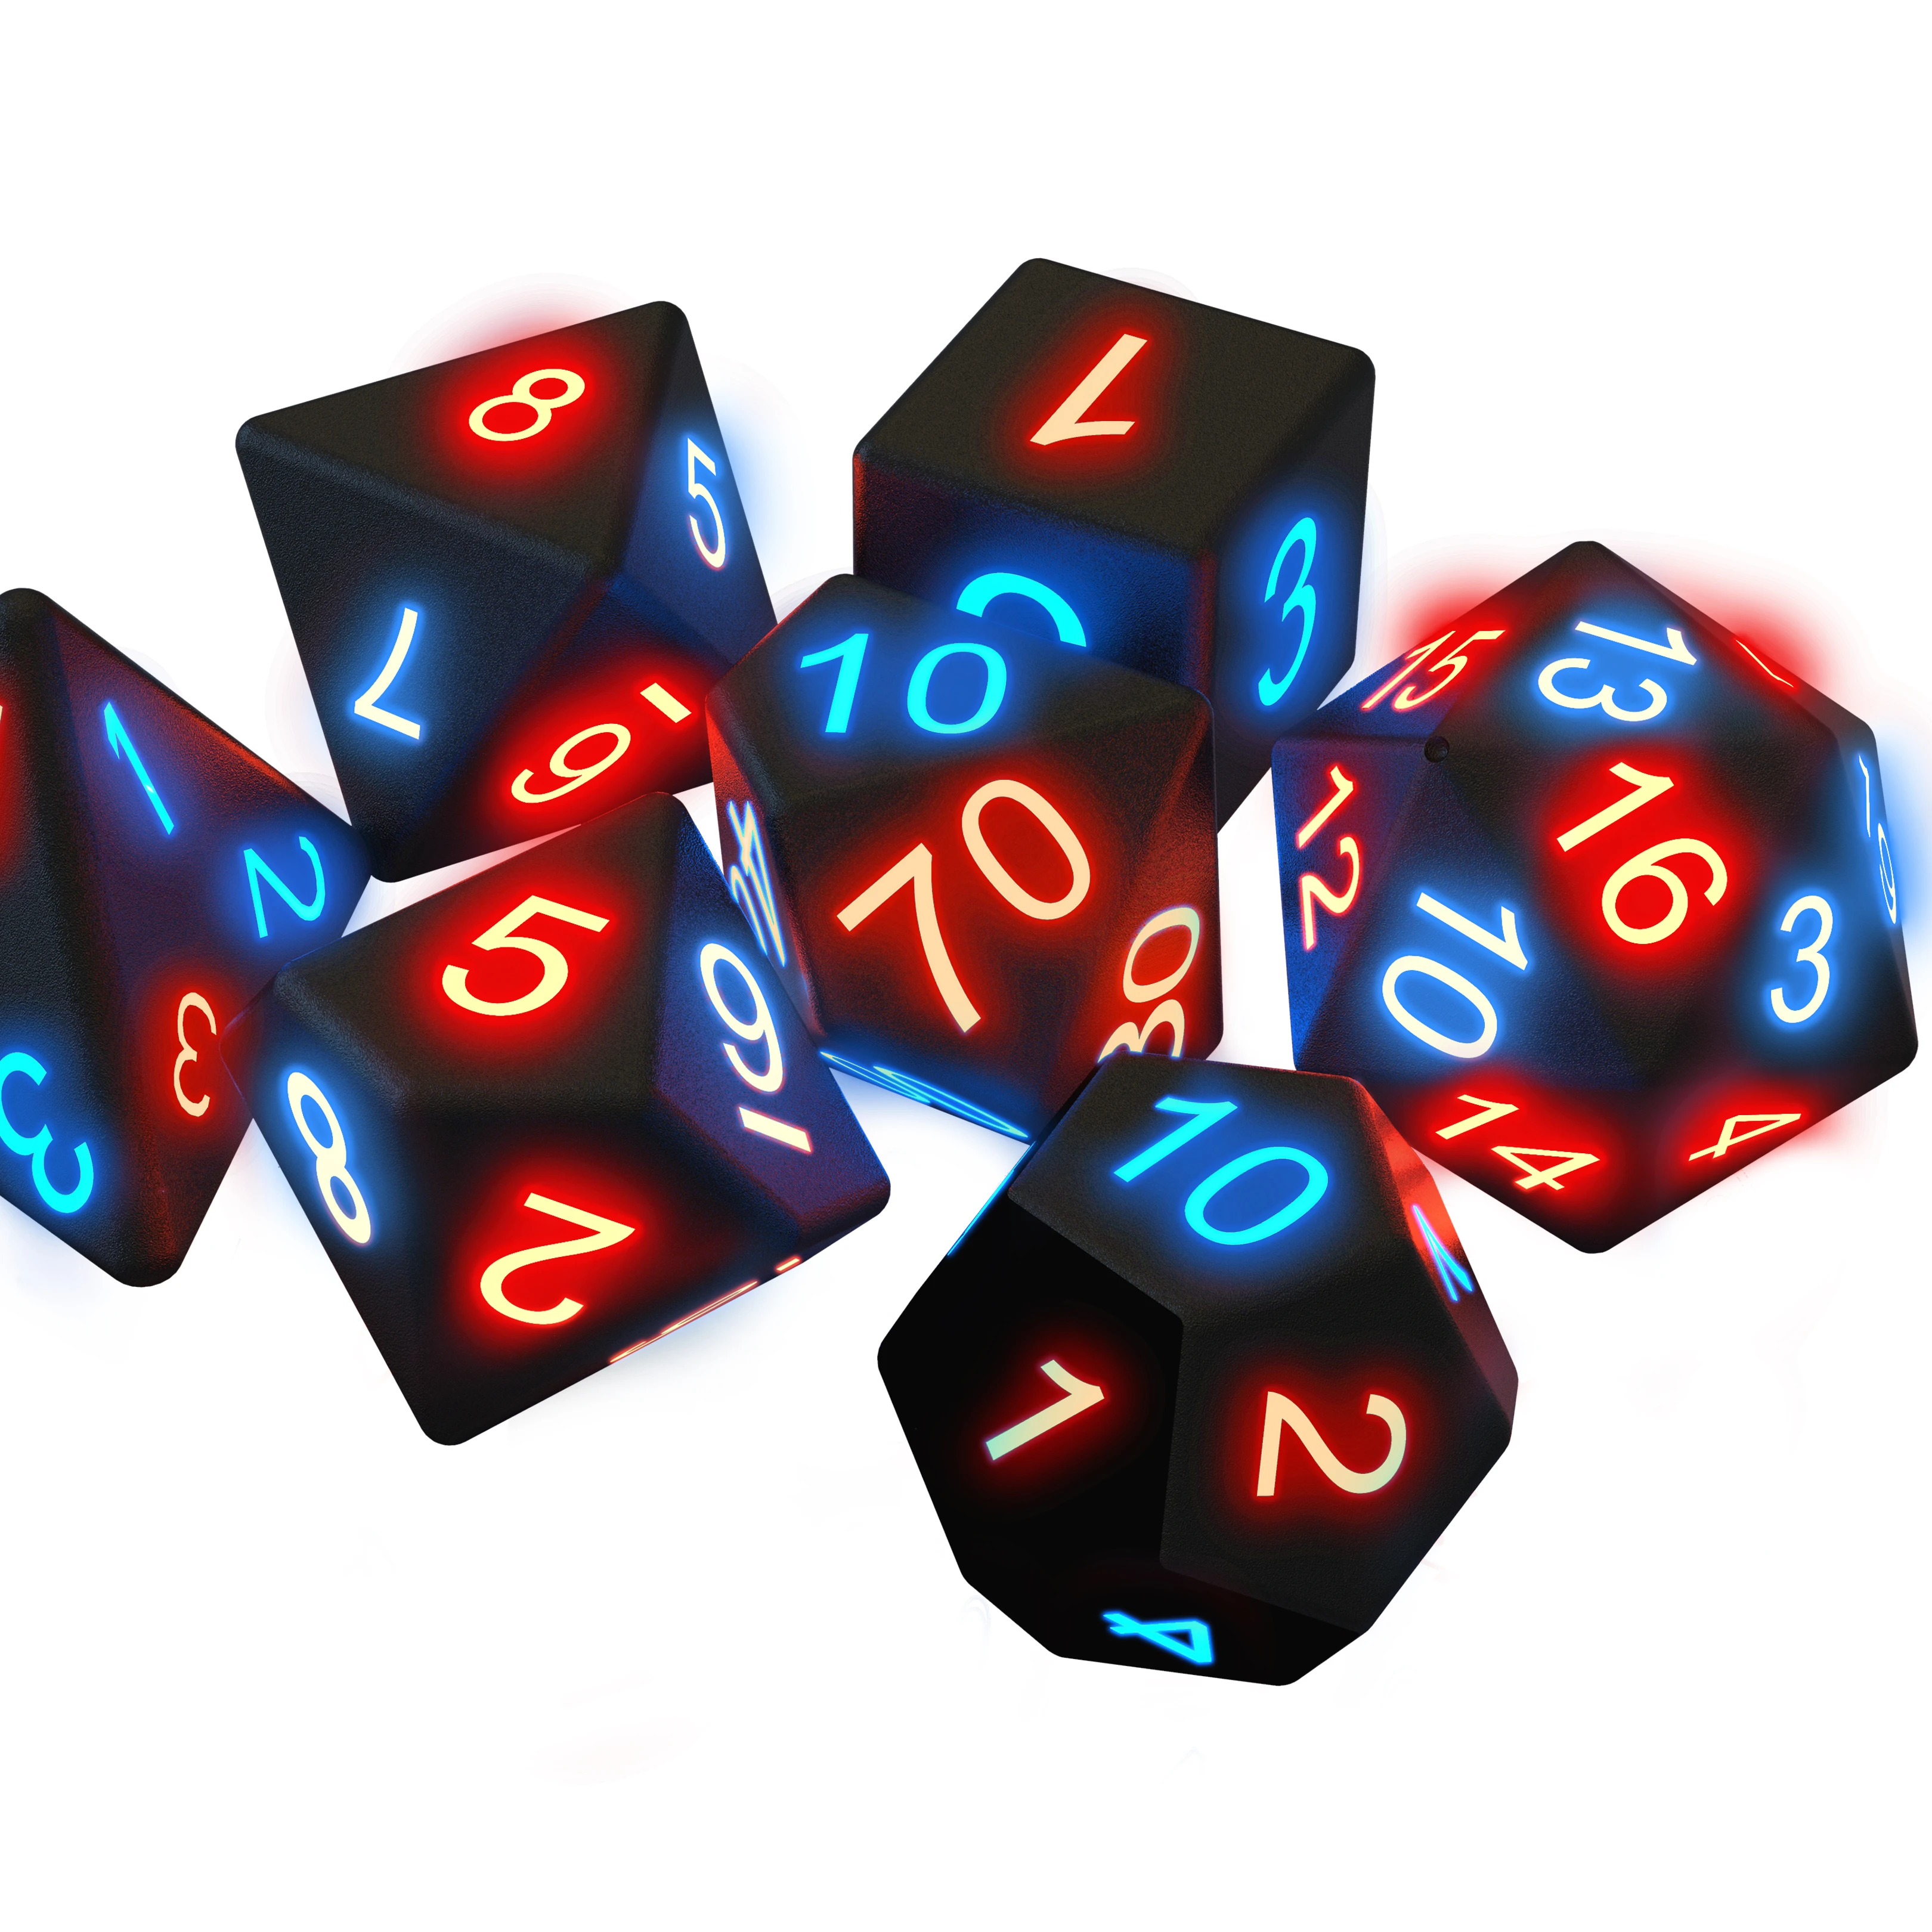 

7PCS Sets Dungeons and Dragons D D Pole Playing Games DND Dice D4 D6 D8 D10 D12 D20 Polyhedral LED Electronic Dices